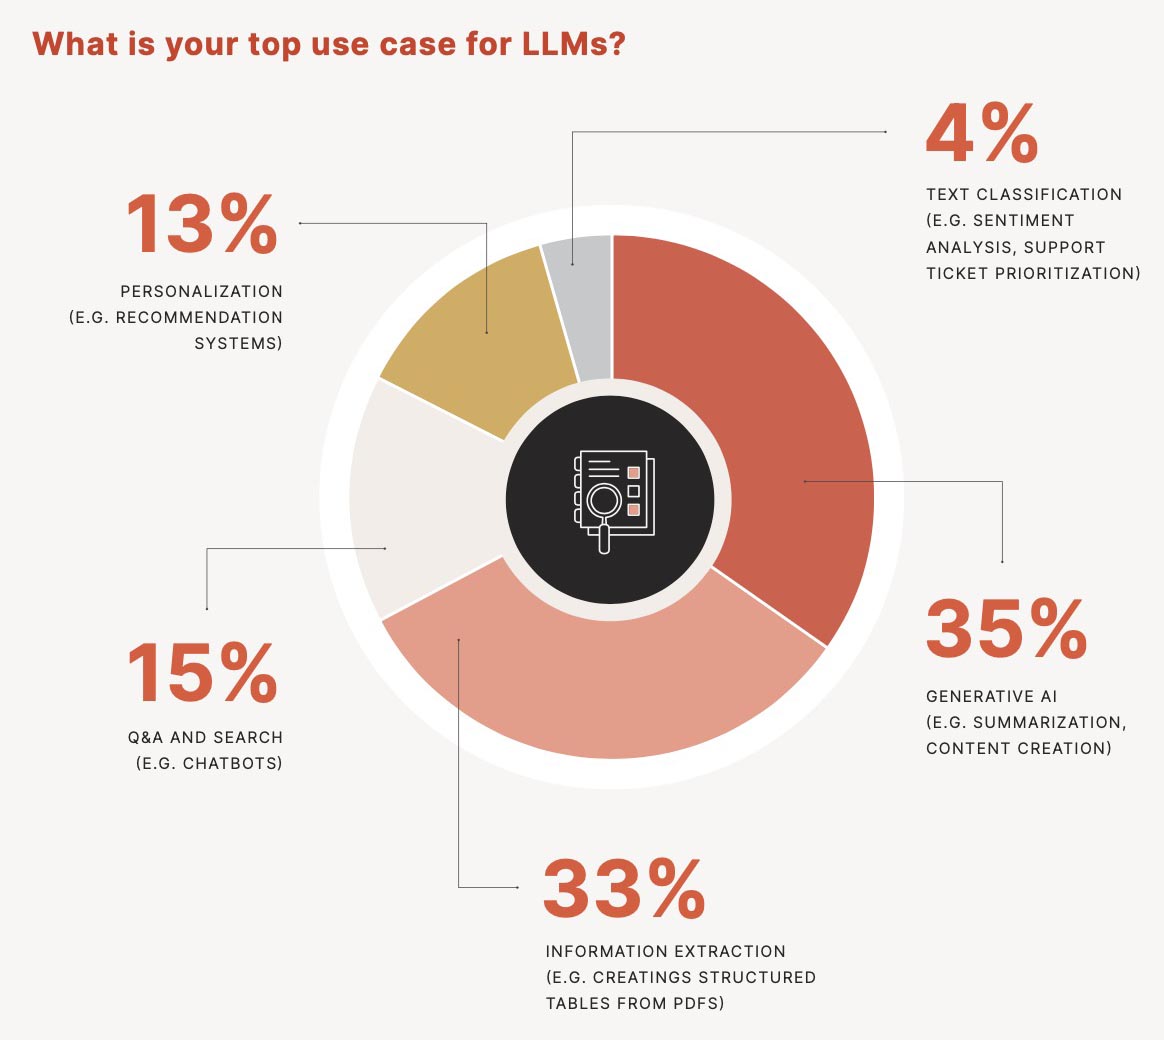 What Is Your Top Case For Commercial Llms?